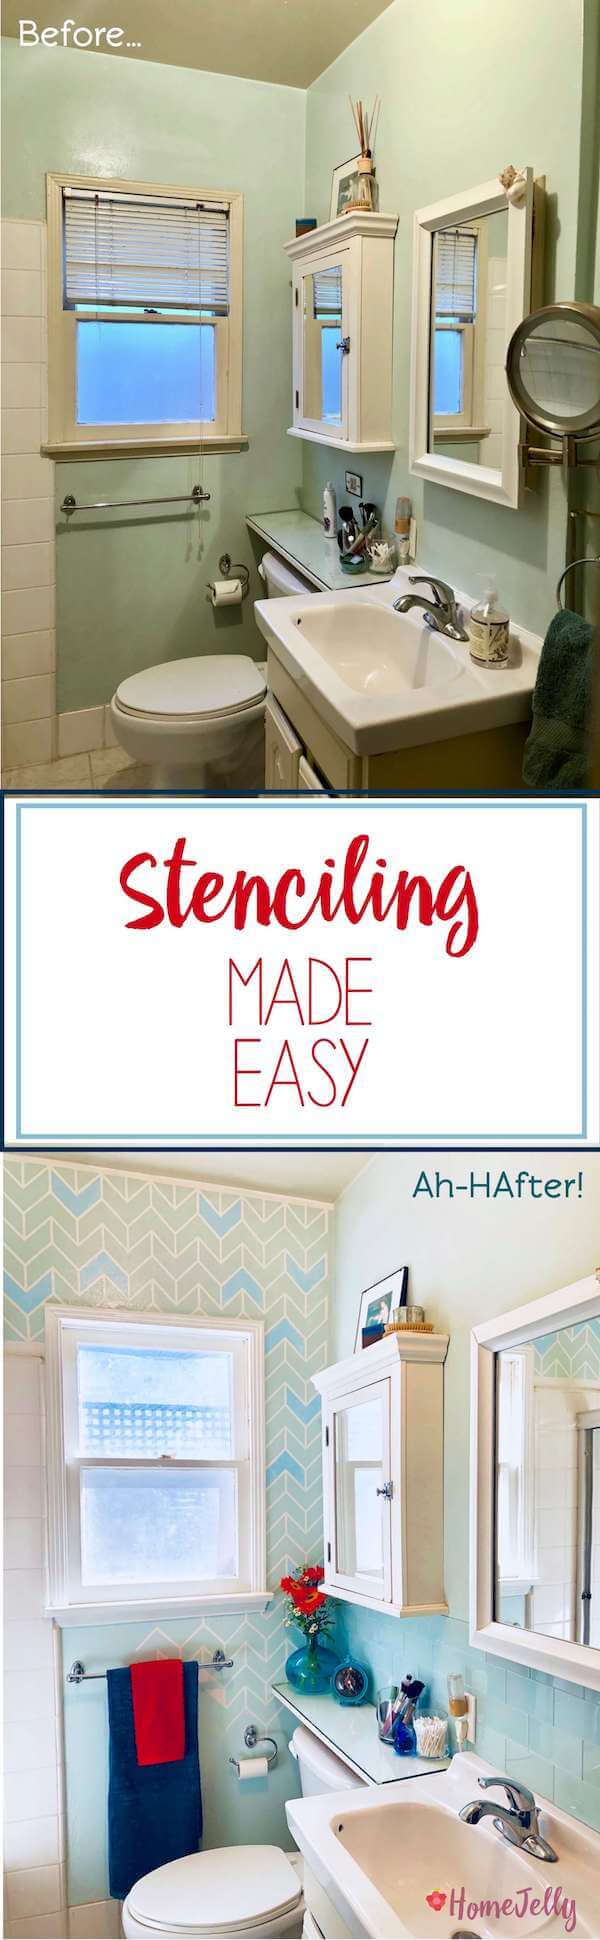 bathroom stencil before and after Stenciling made easy